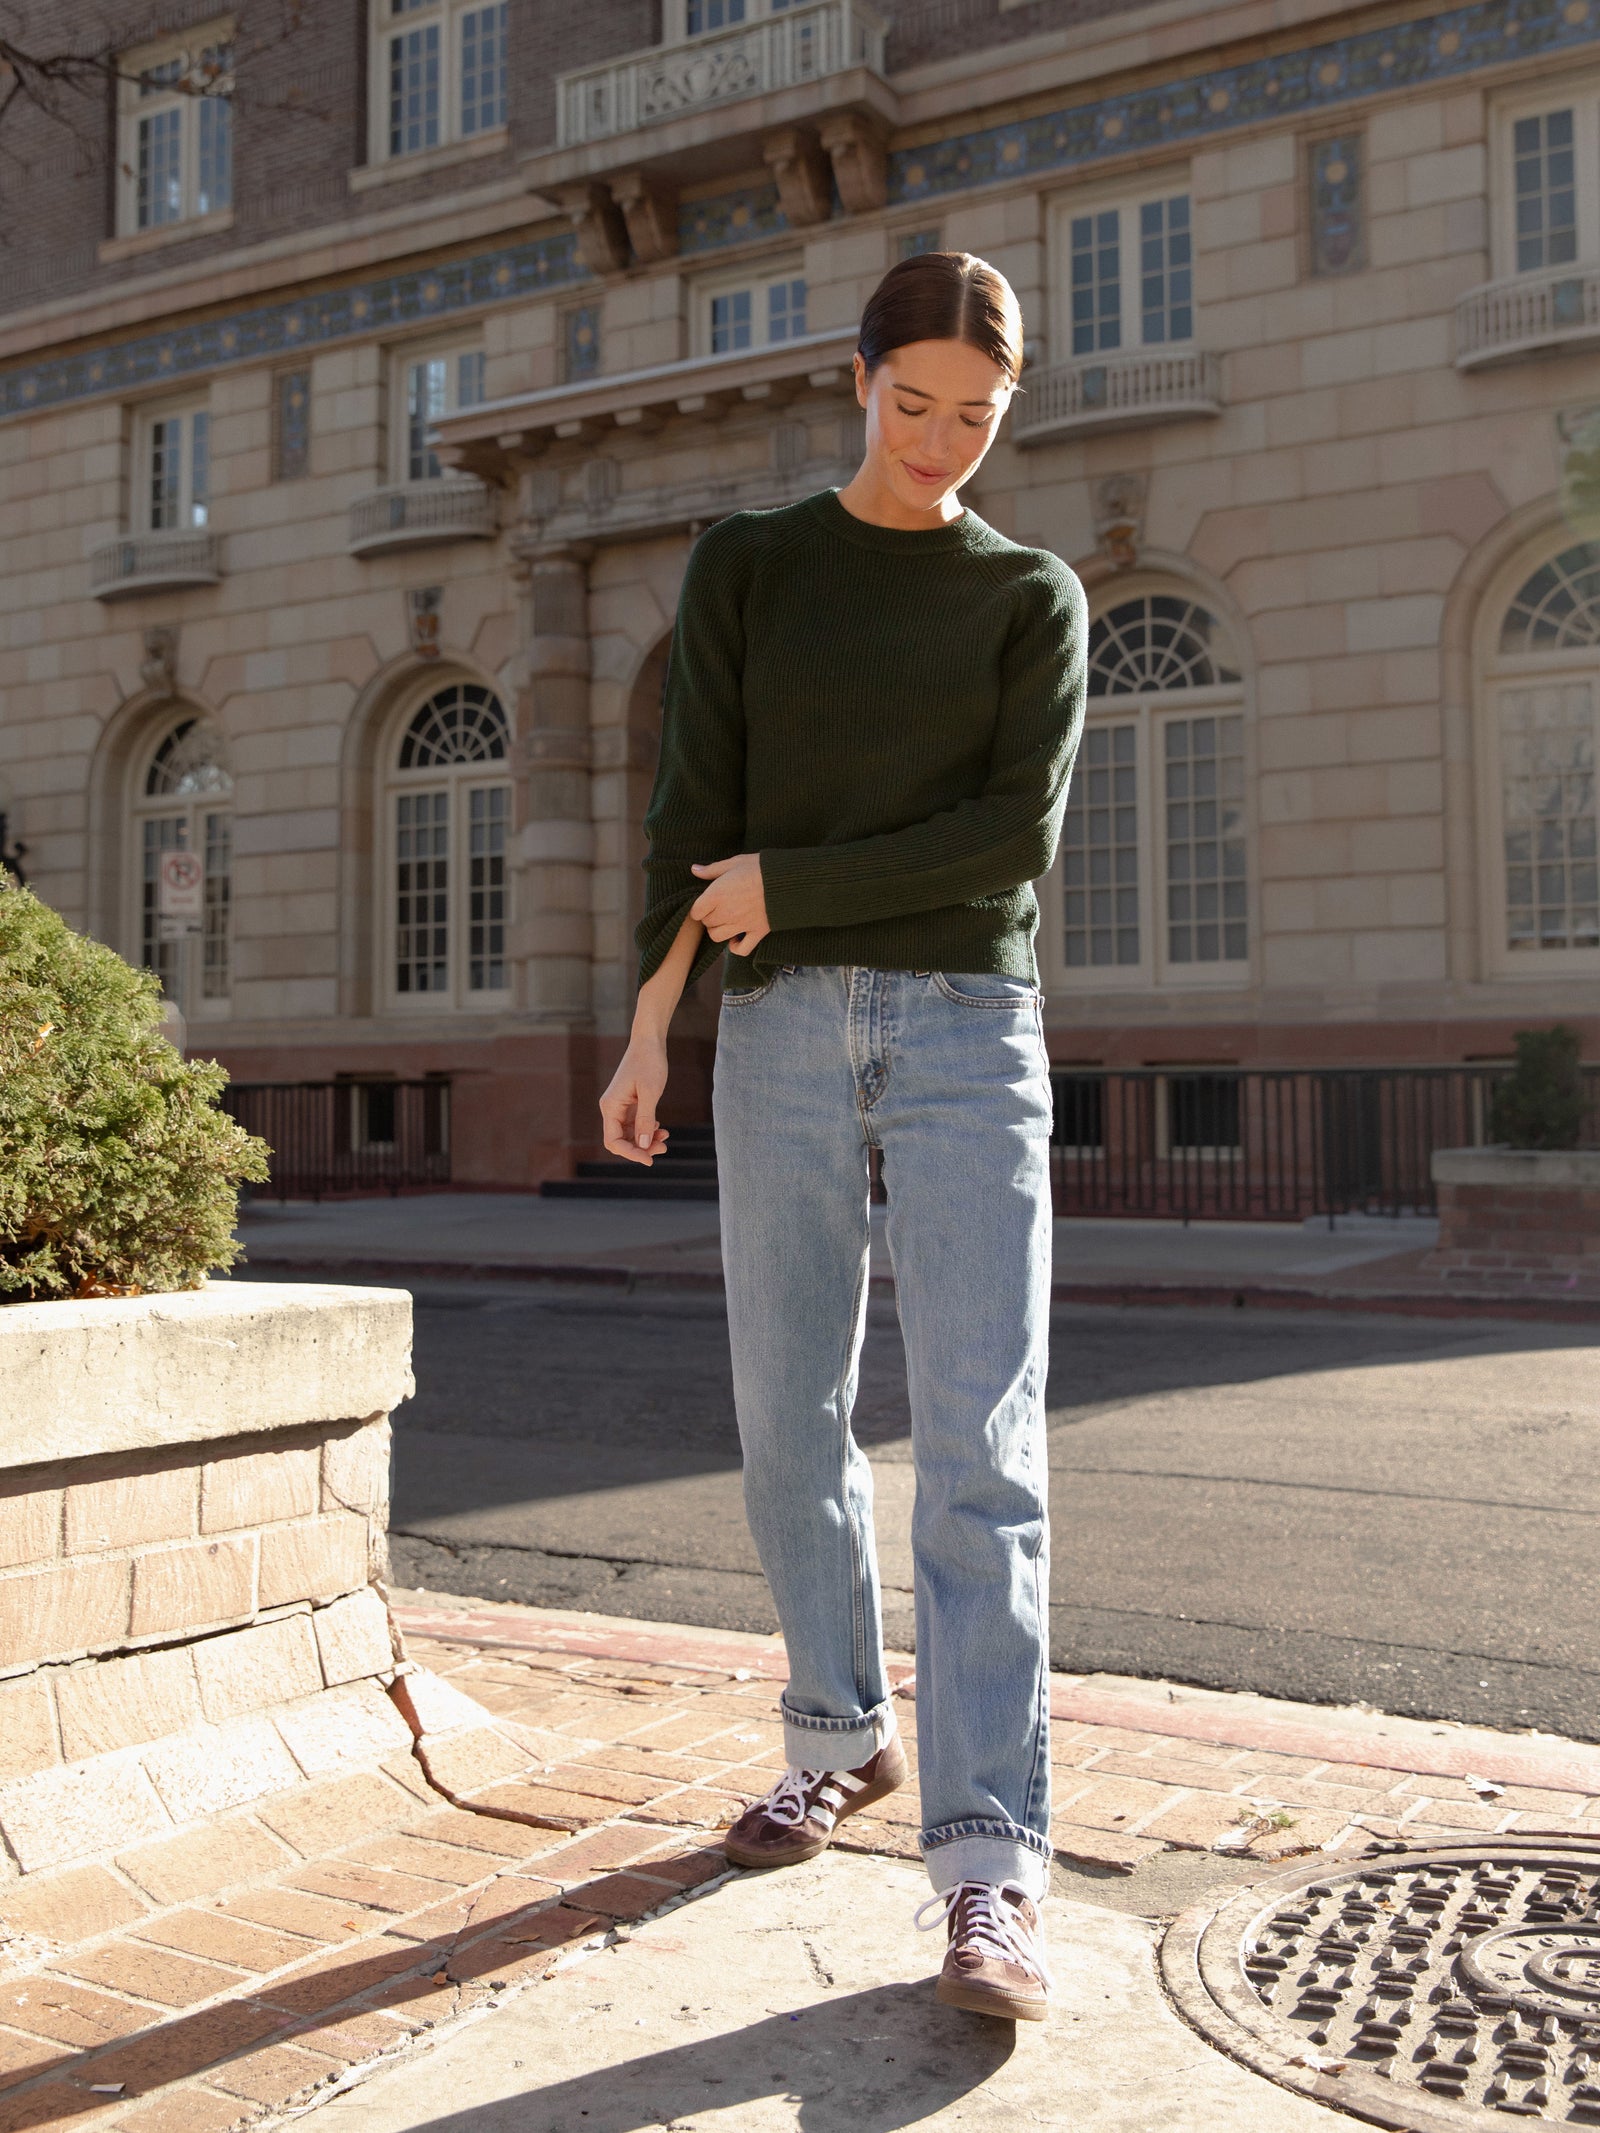 Woman wearing juniper classic crewneck and jeans on city street 